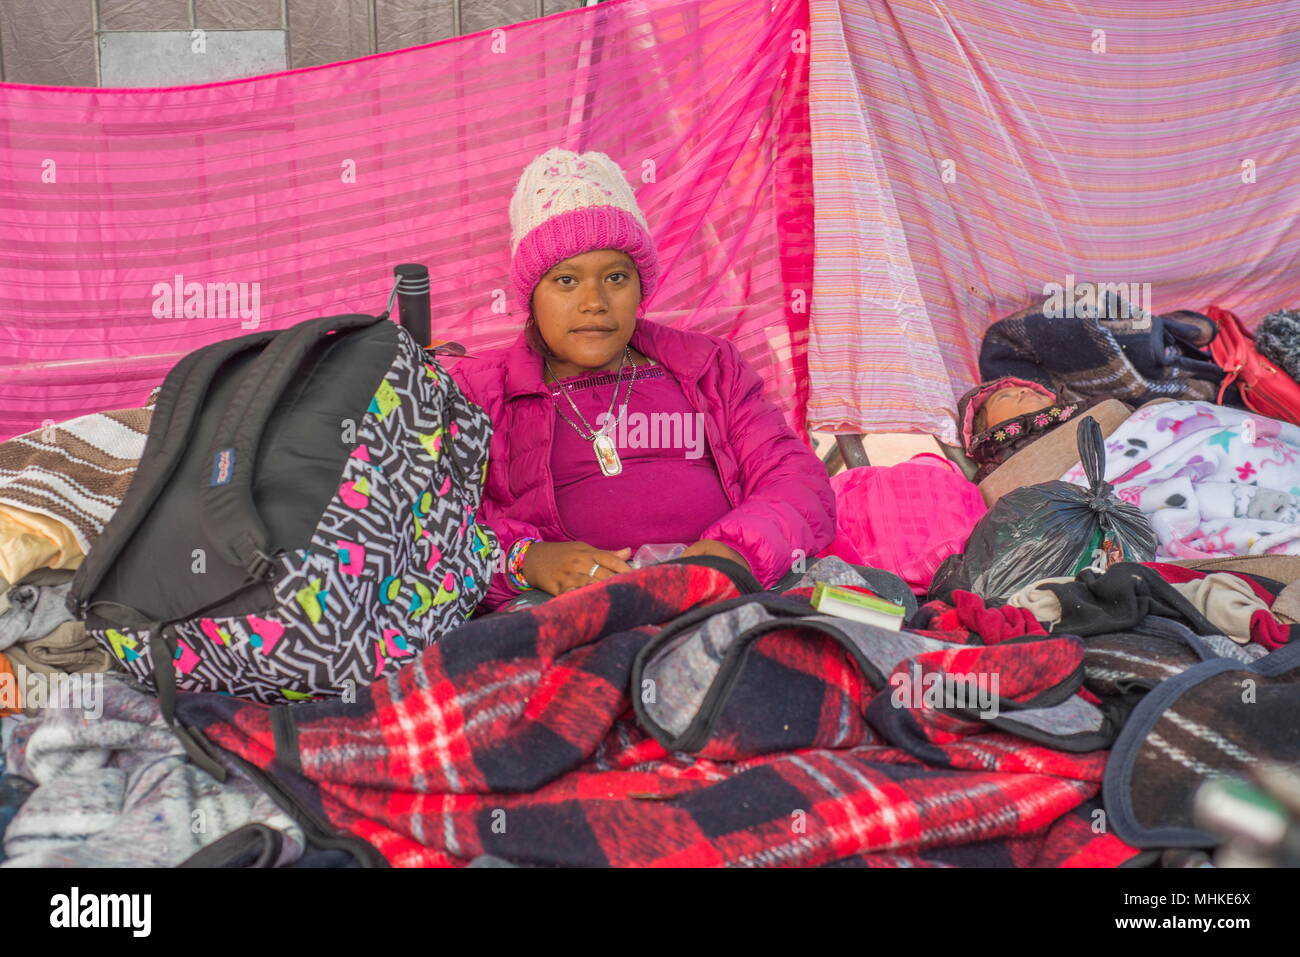 Tijuana, Mexico. 1st May, 2018. Members of the migrant caravan from Central America camp out under donated tarp and in tents at the Mexico-US Border El Chaparral crossing. They are seeking asylum in the United States and will have to wait in Mexico until process is complete. Young migrant traveled from El Salvador to seek asylum in United States. Credit: Vito Di Stefano/ZUMA Wire/Alamy Live News Stock Photo